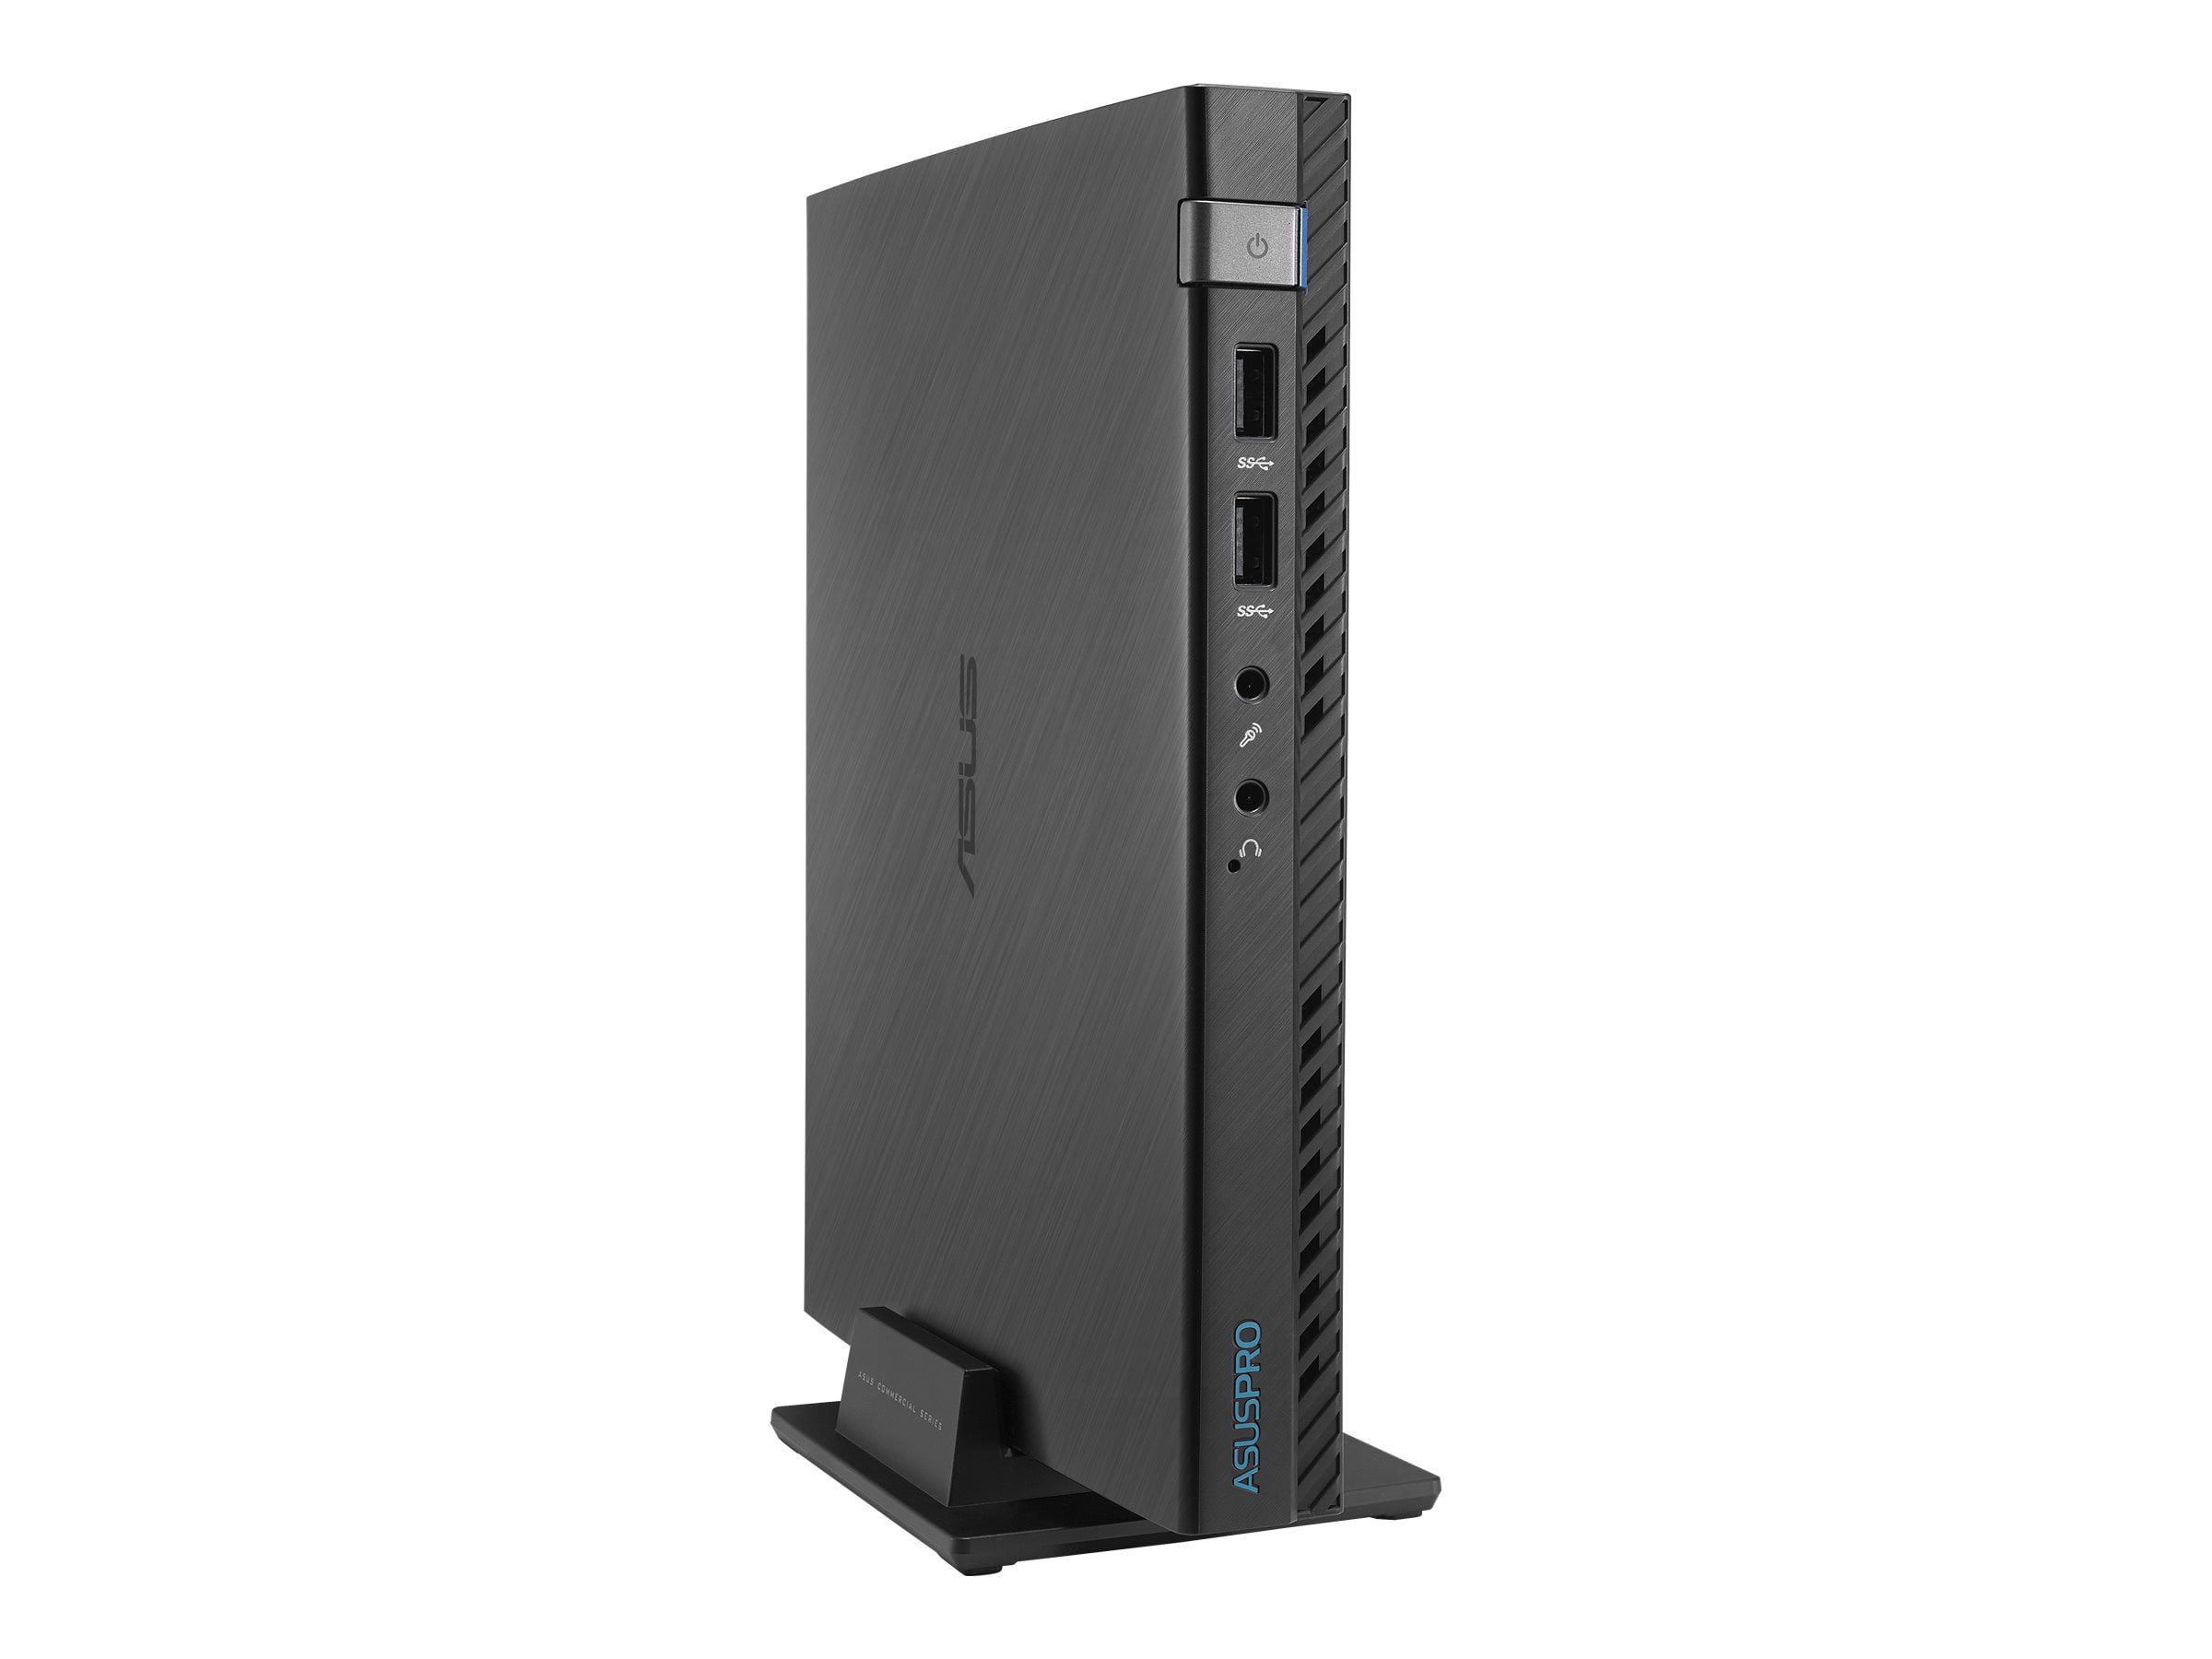 censuur consultant seinpaal ASUS E810-B0274 - Mini PC - Core i3 4150T / 3 GHz - RAM 4 GB - HDD 500 GB -  HD Graphics 4400 - GigE - WLAN: 802.11b/g/n - Win 8.1